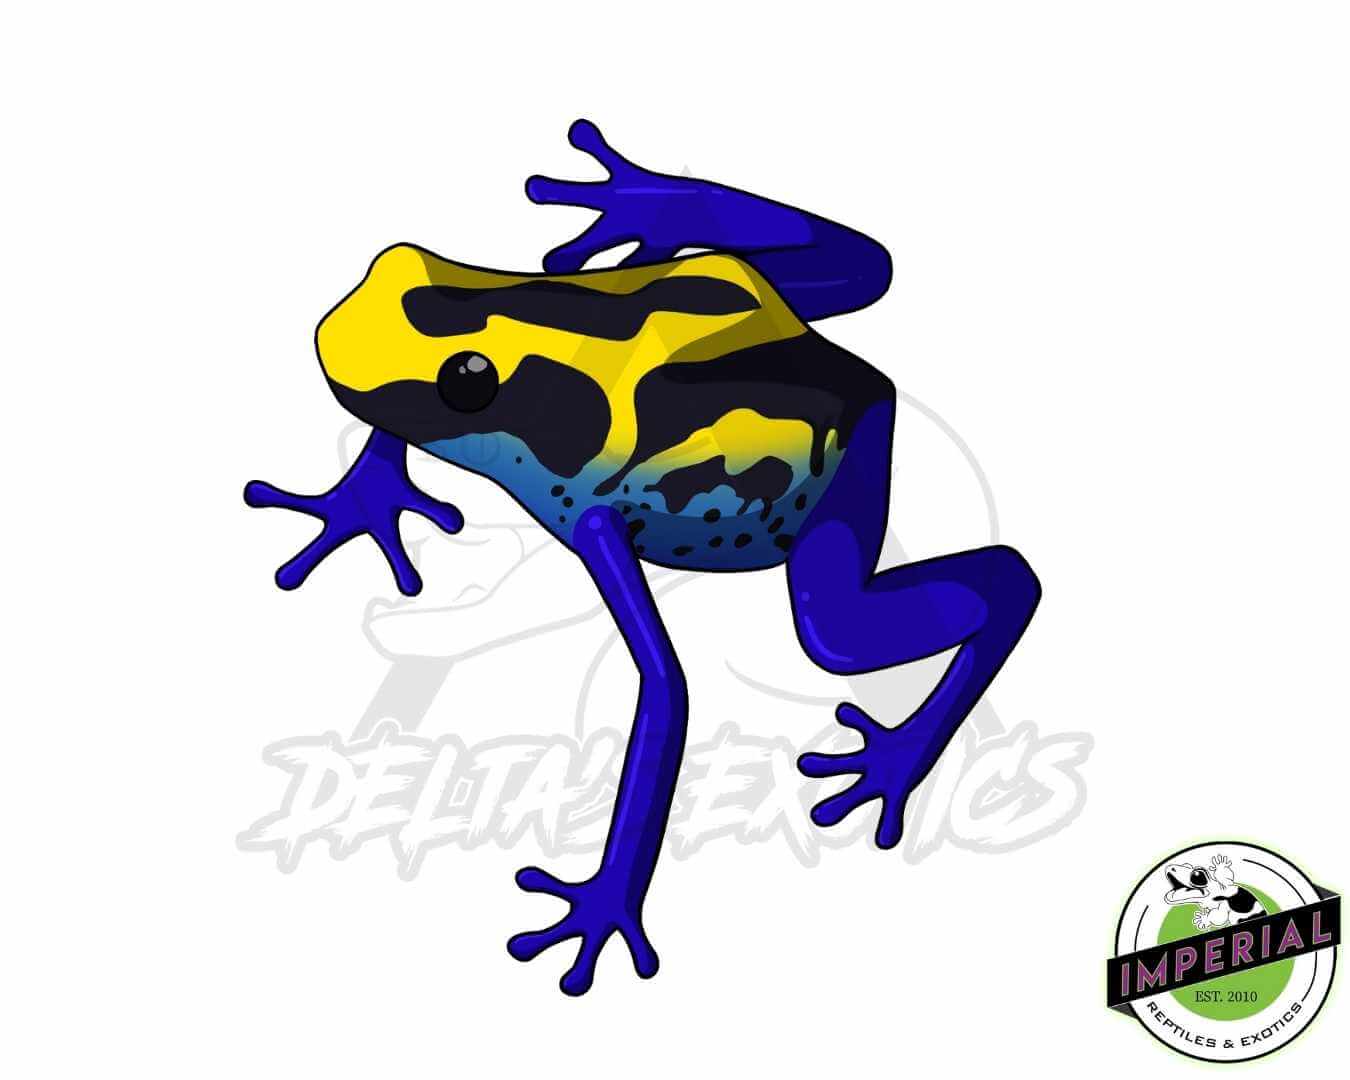 buy unique reptile stickers online at cheap prices. water proof reptile stickers for notebooks, laptops, phone cases, and more